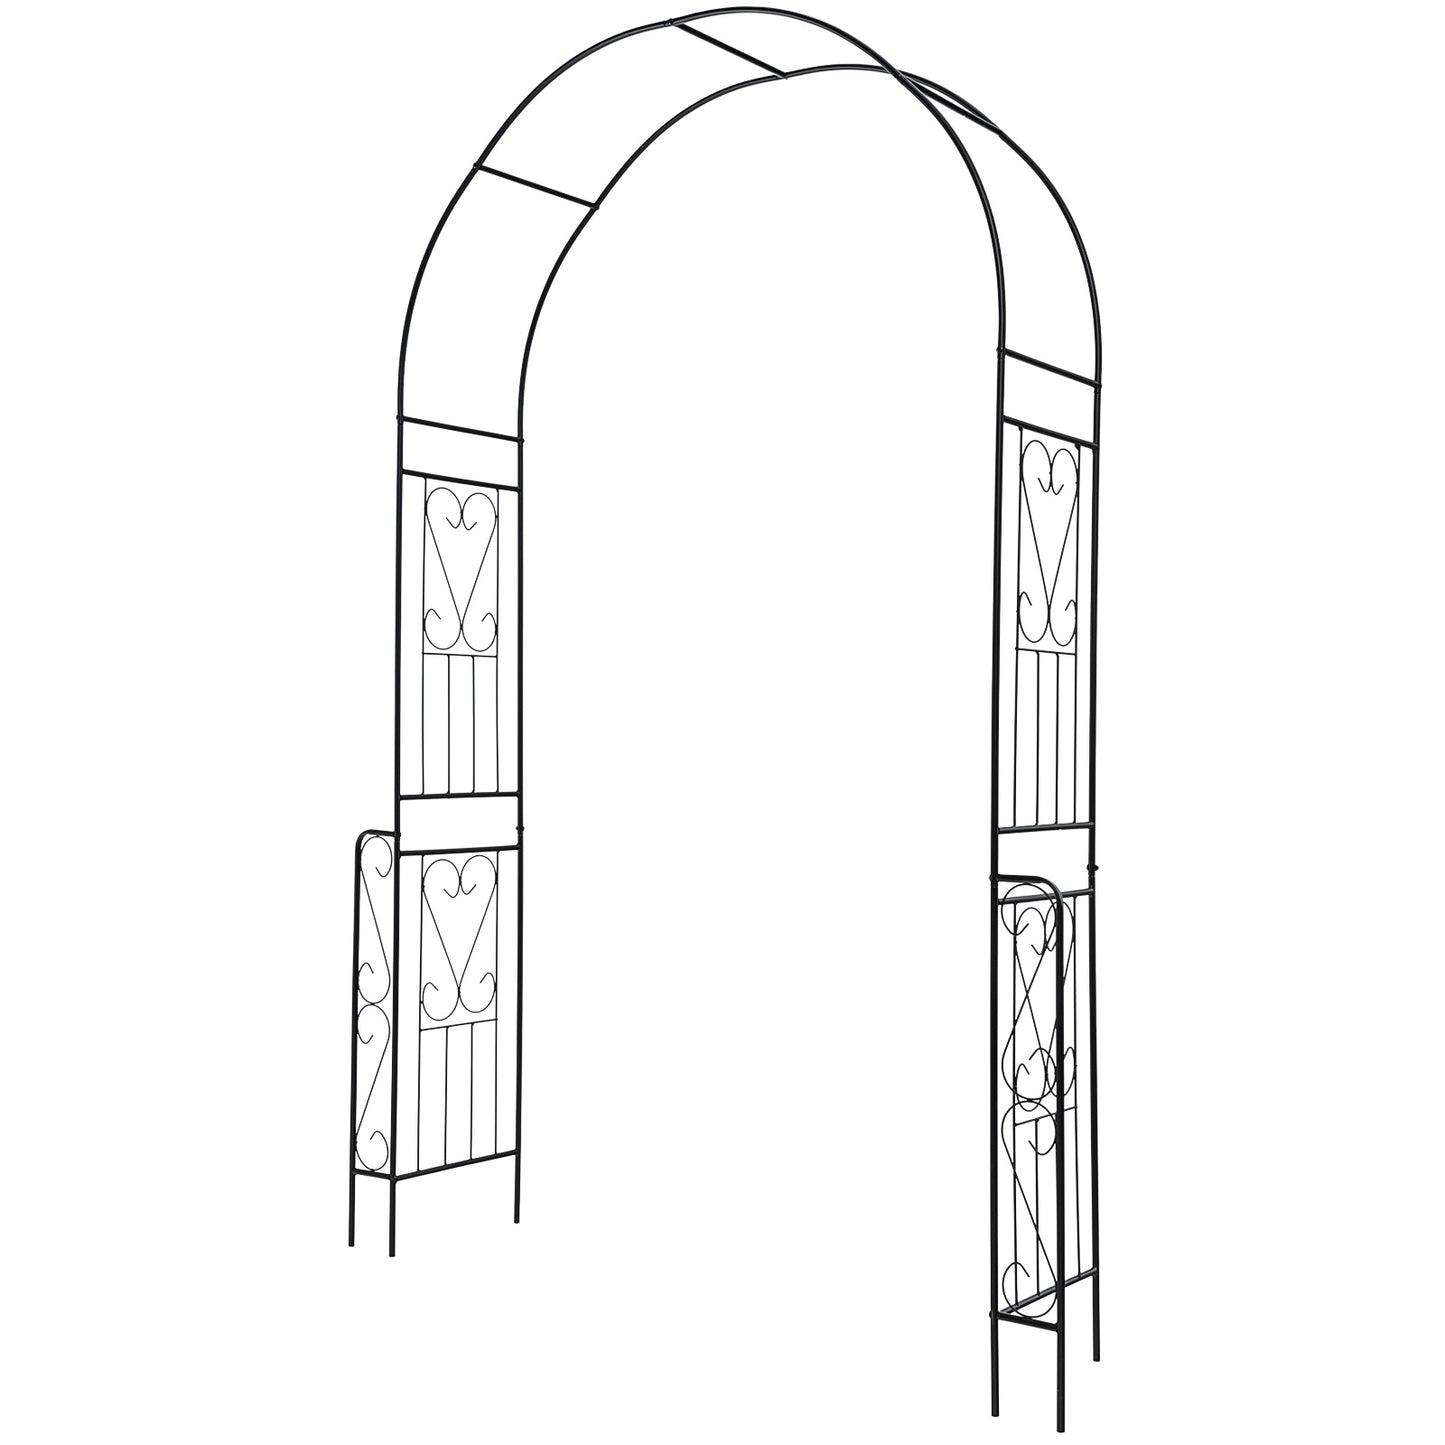 7.9 Feet Metal Garden Arch Backdrop Stand with Fence for Climbing Plants-Black